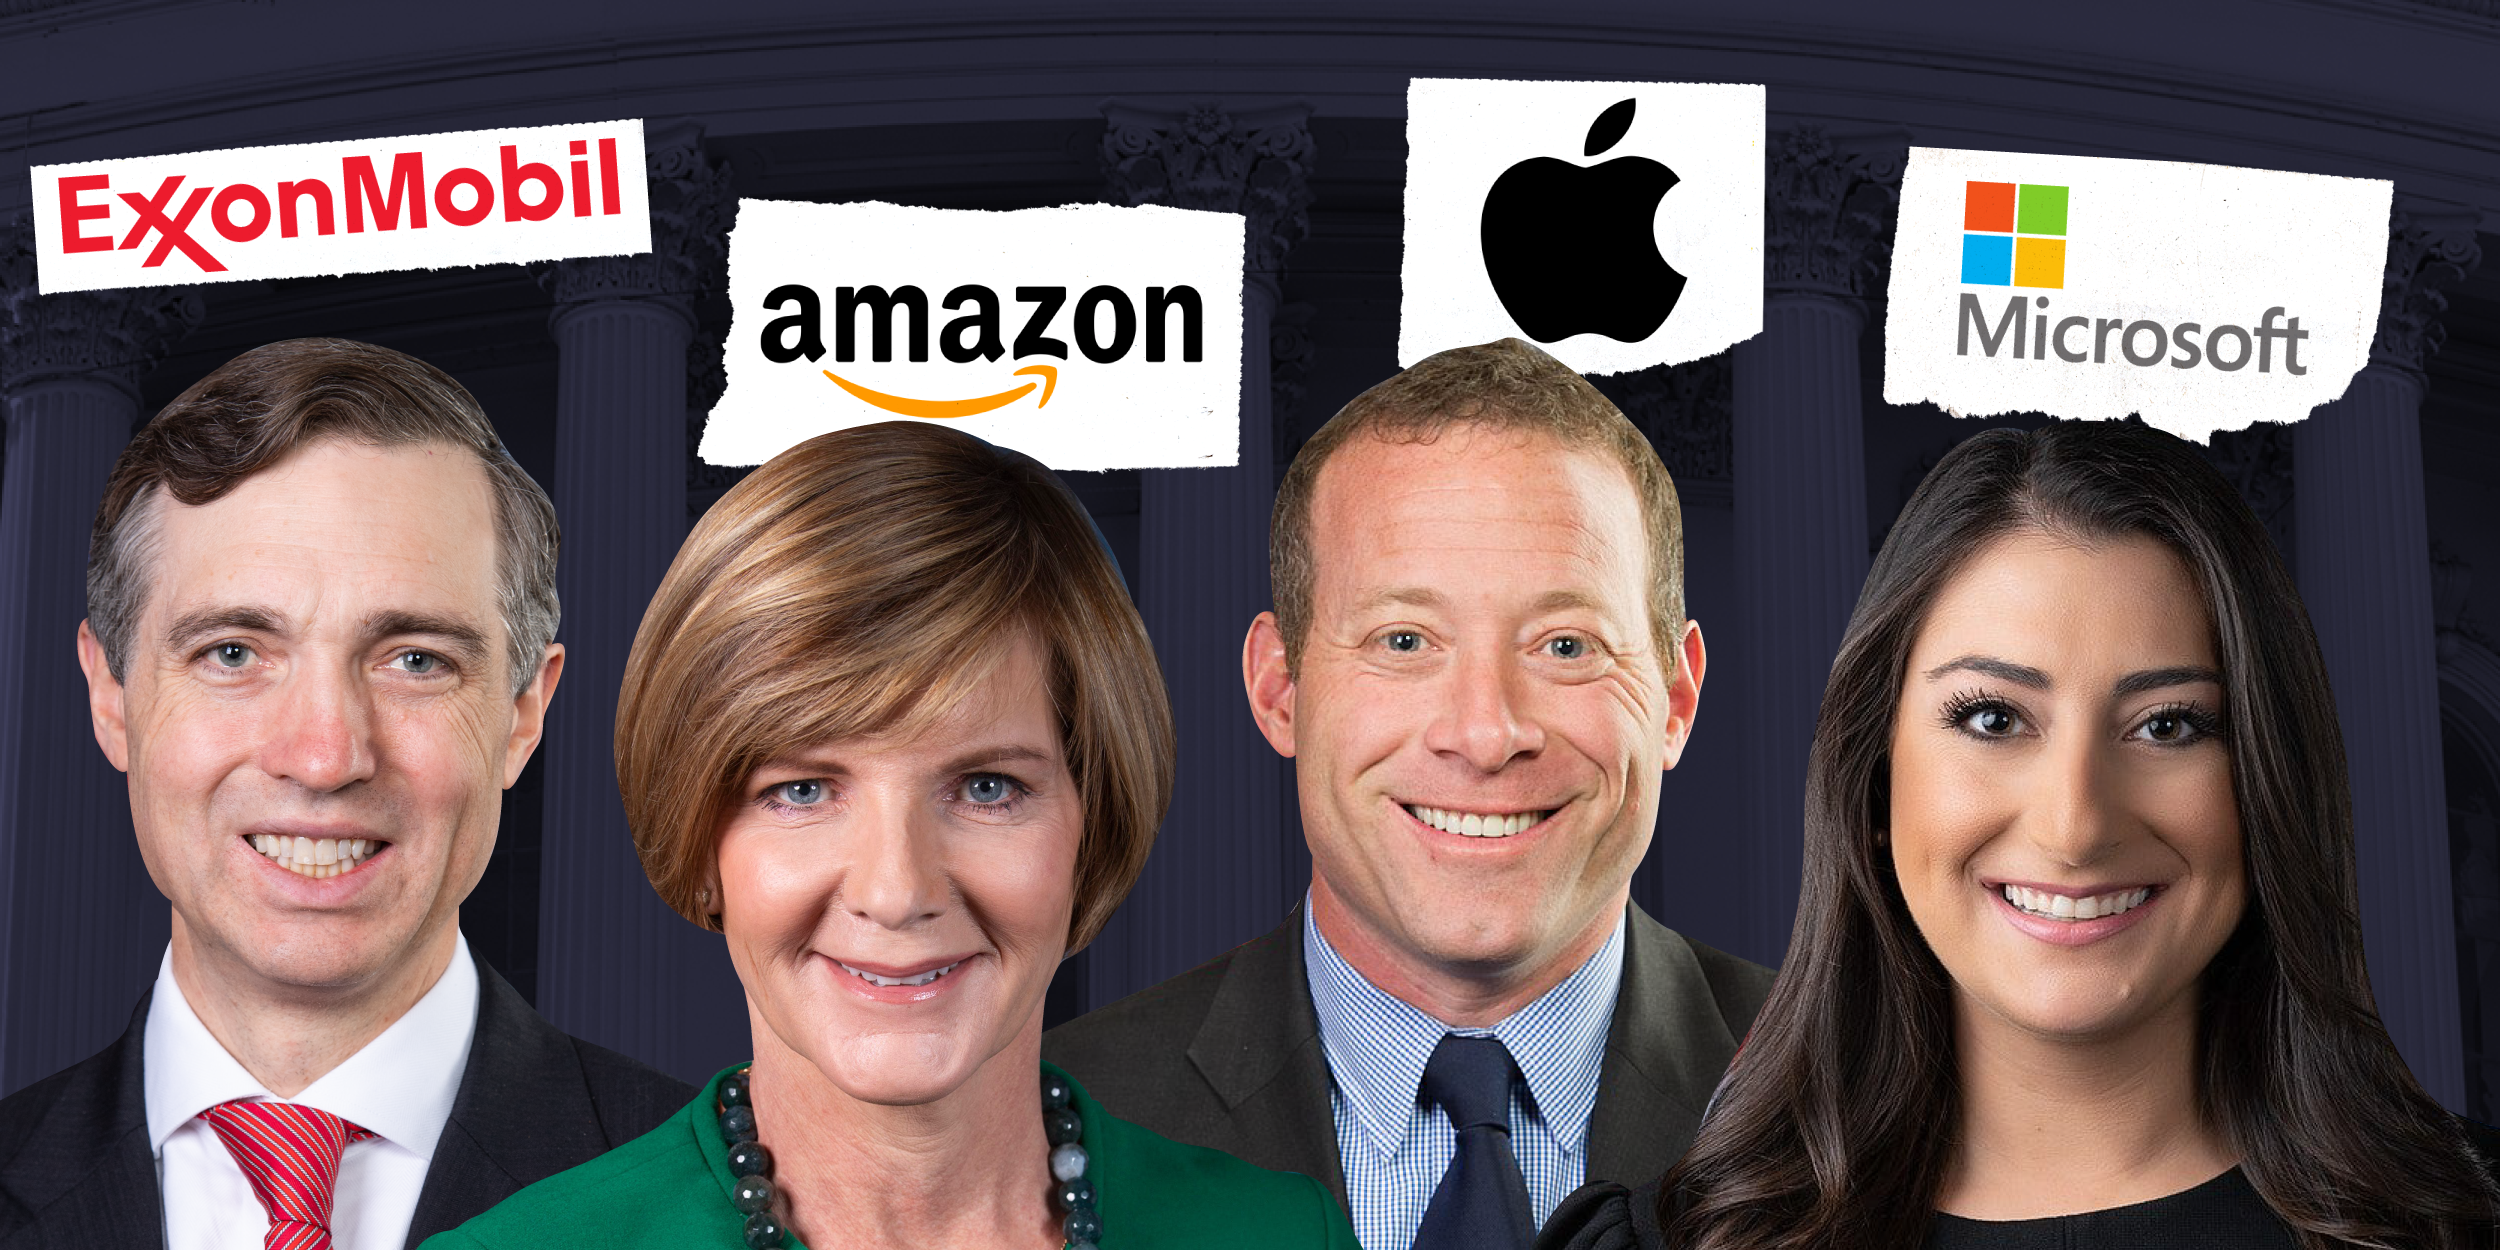 Reps. Josh Gottheimer, Sara Jacobs, Van Taylor, and Susie Lee in front of Exxon Mobil, Amazon, Apple, and Microsoft lgoos.